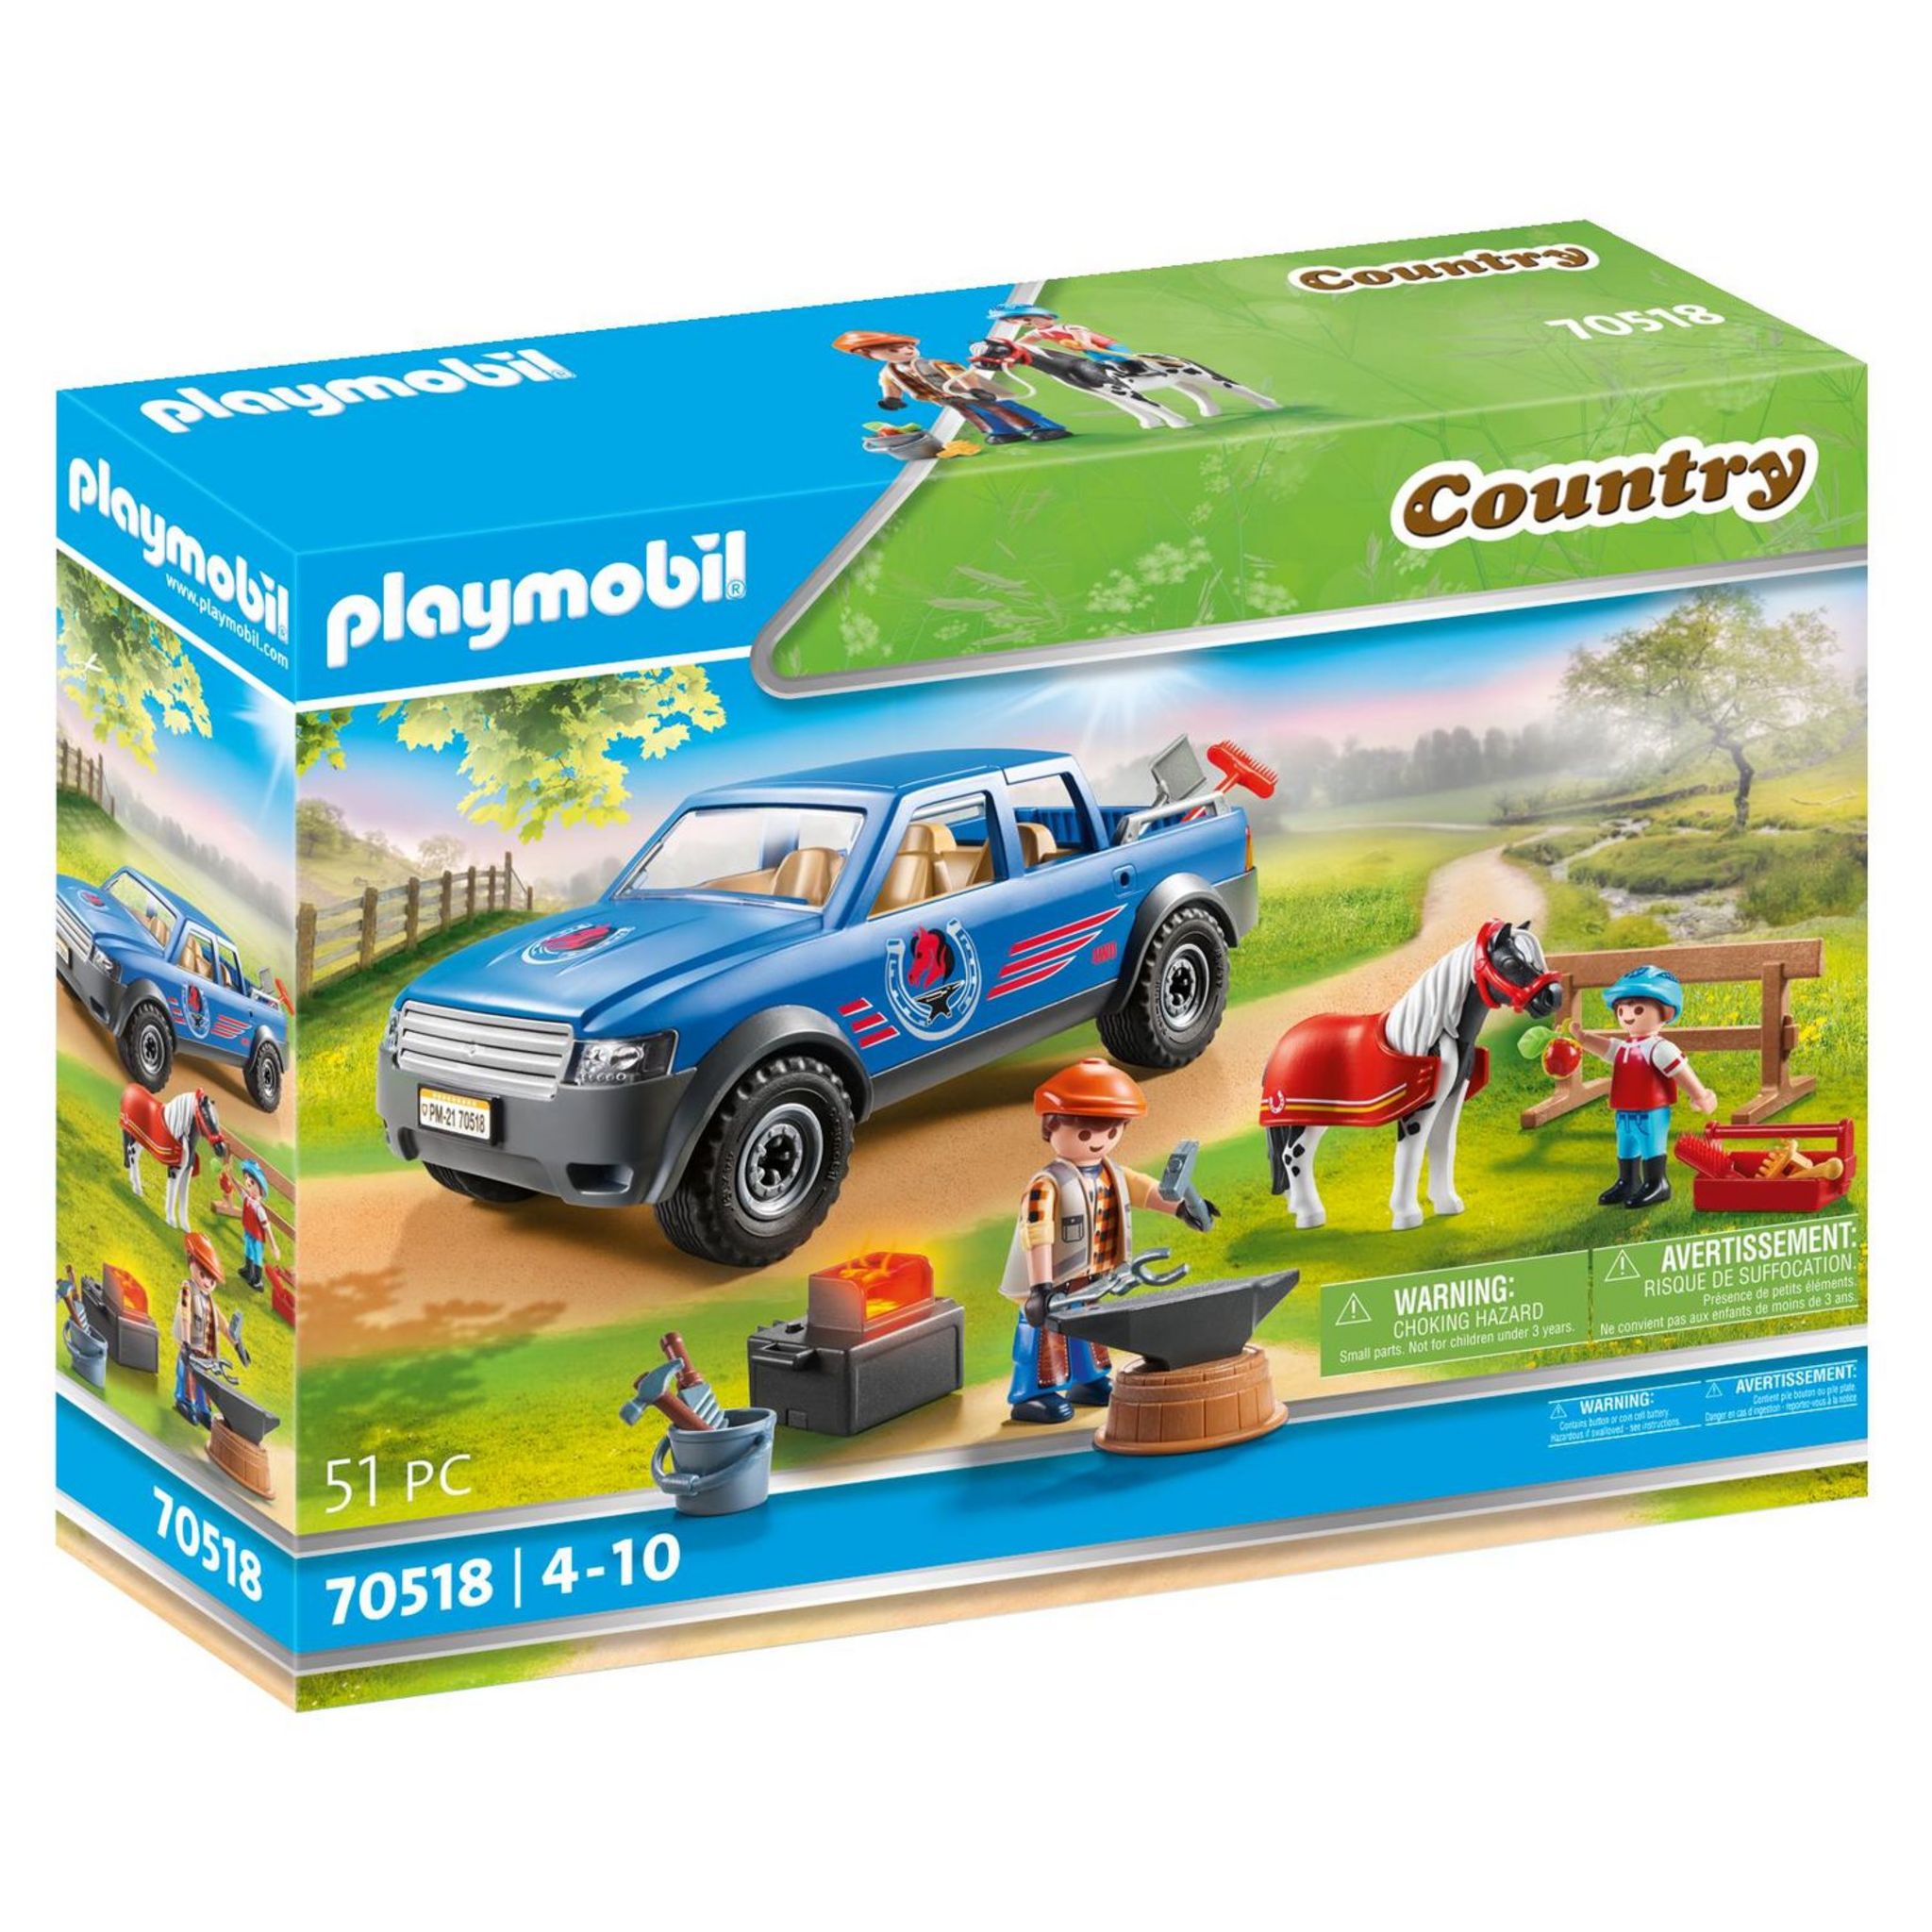 Playmobil Country maison mobile et poney 70510